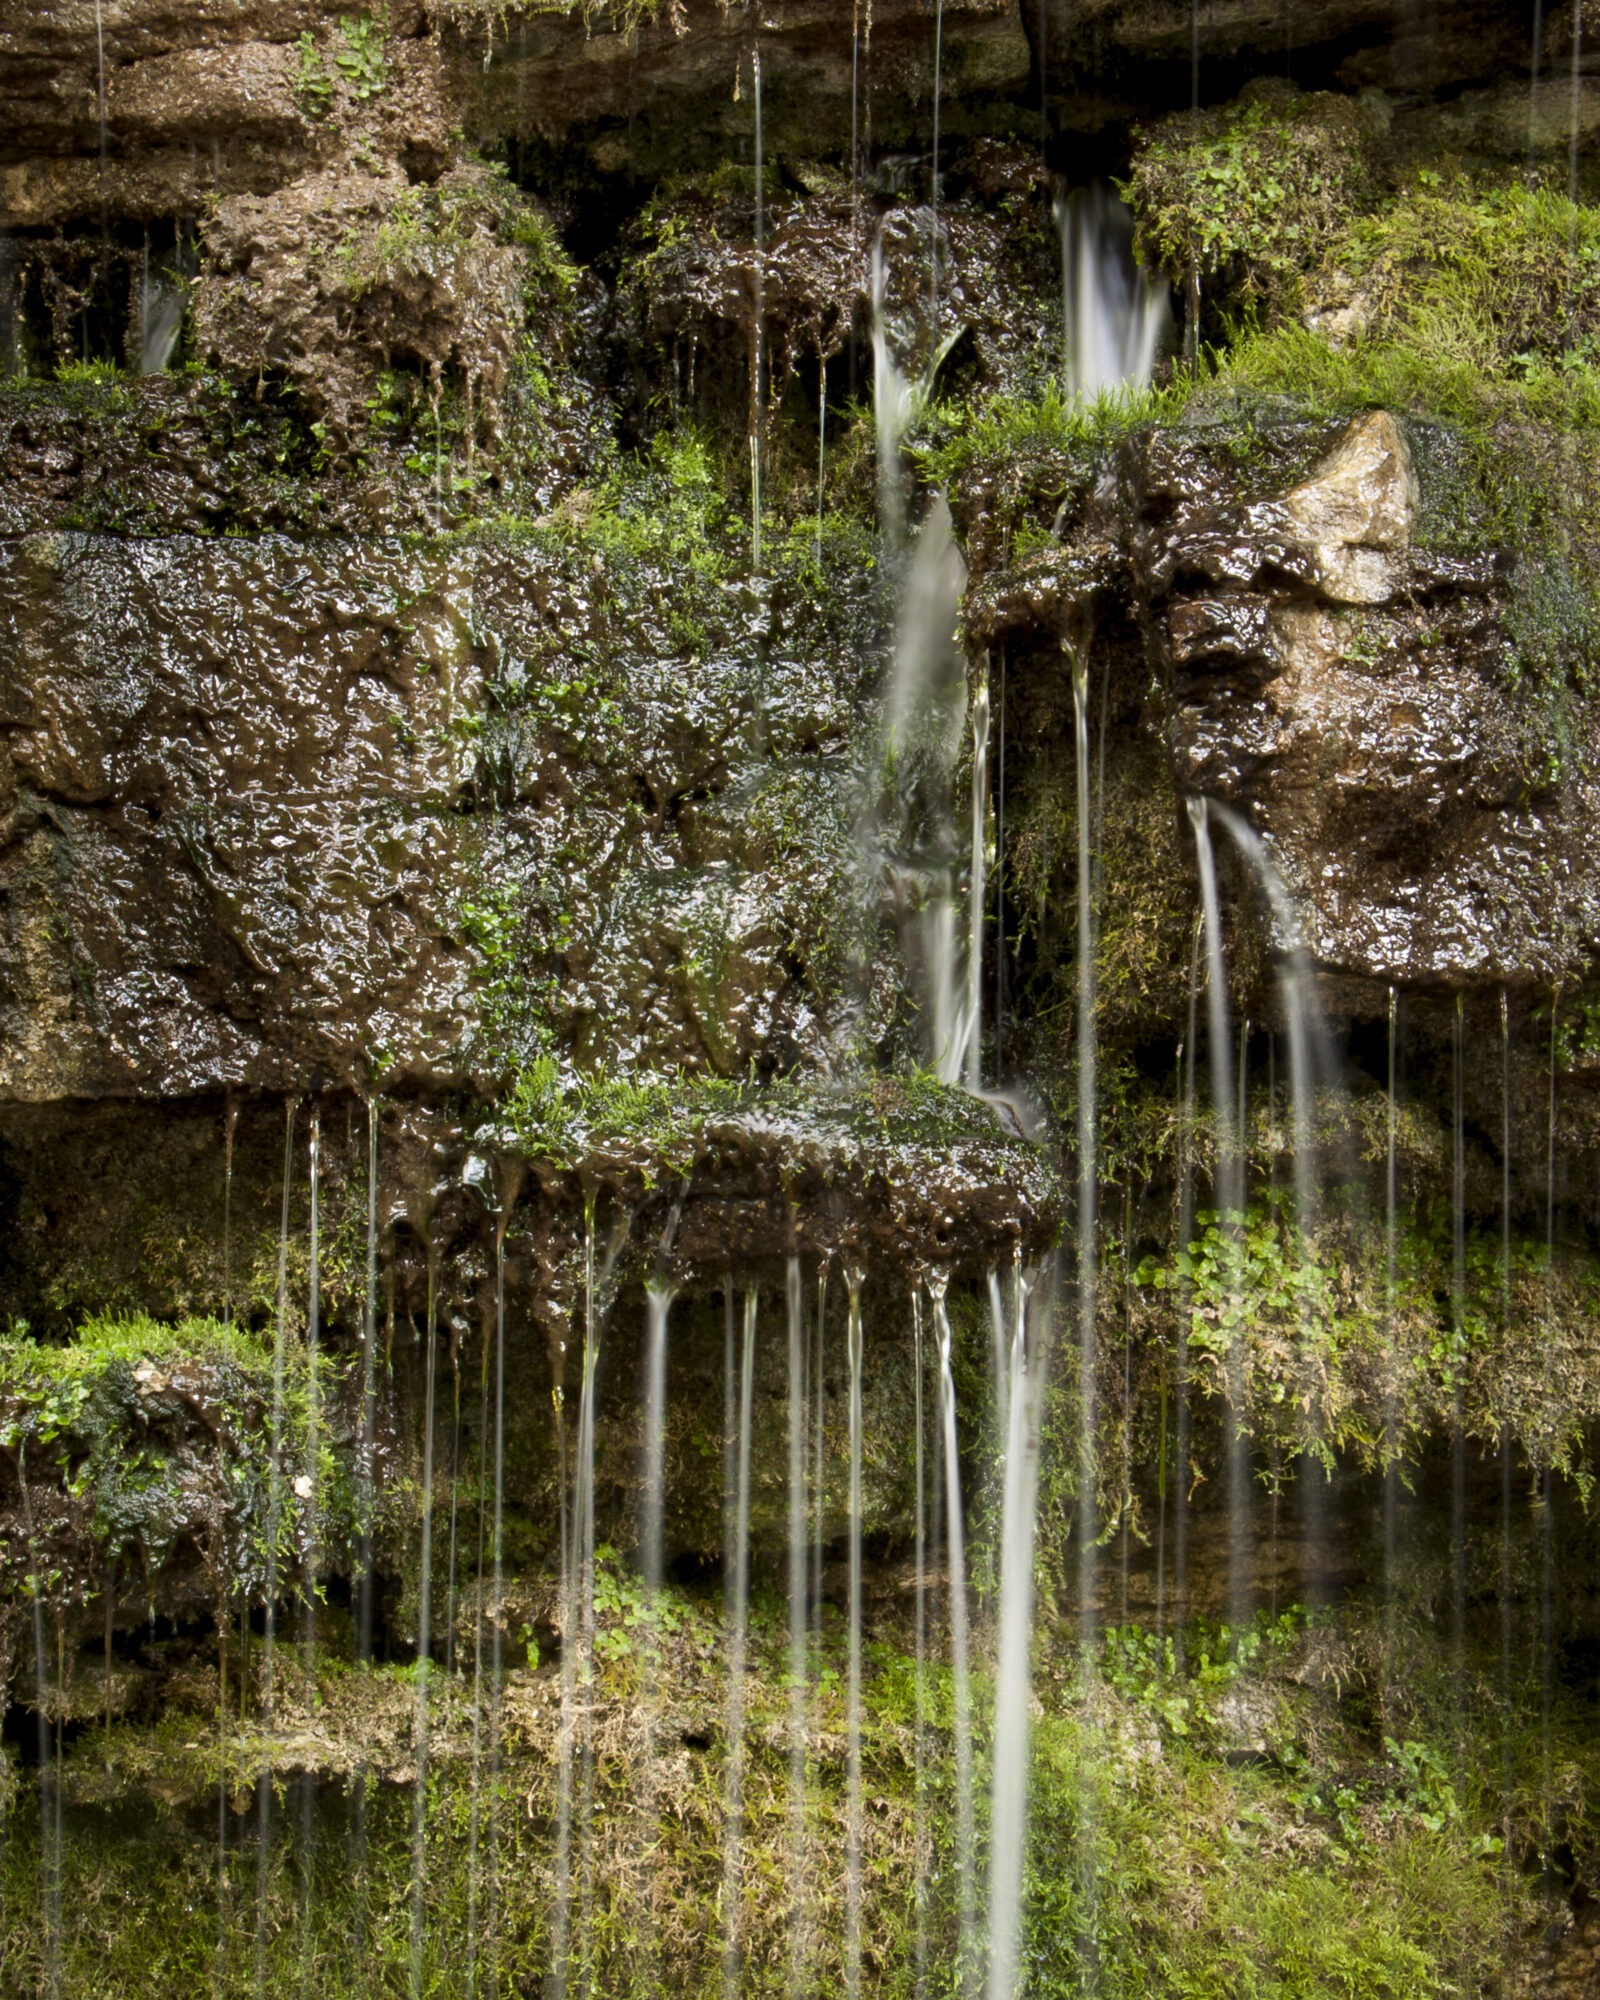 Water pouring over moss-covered limestone.